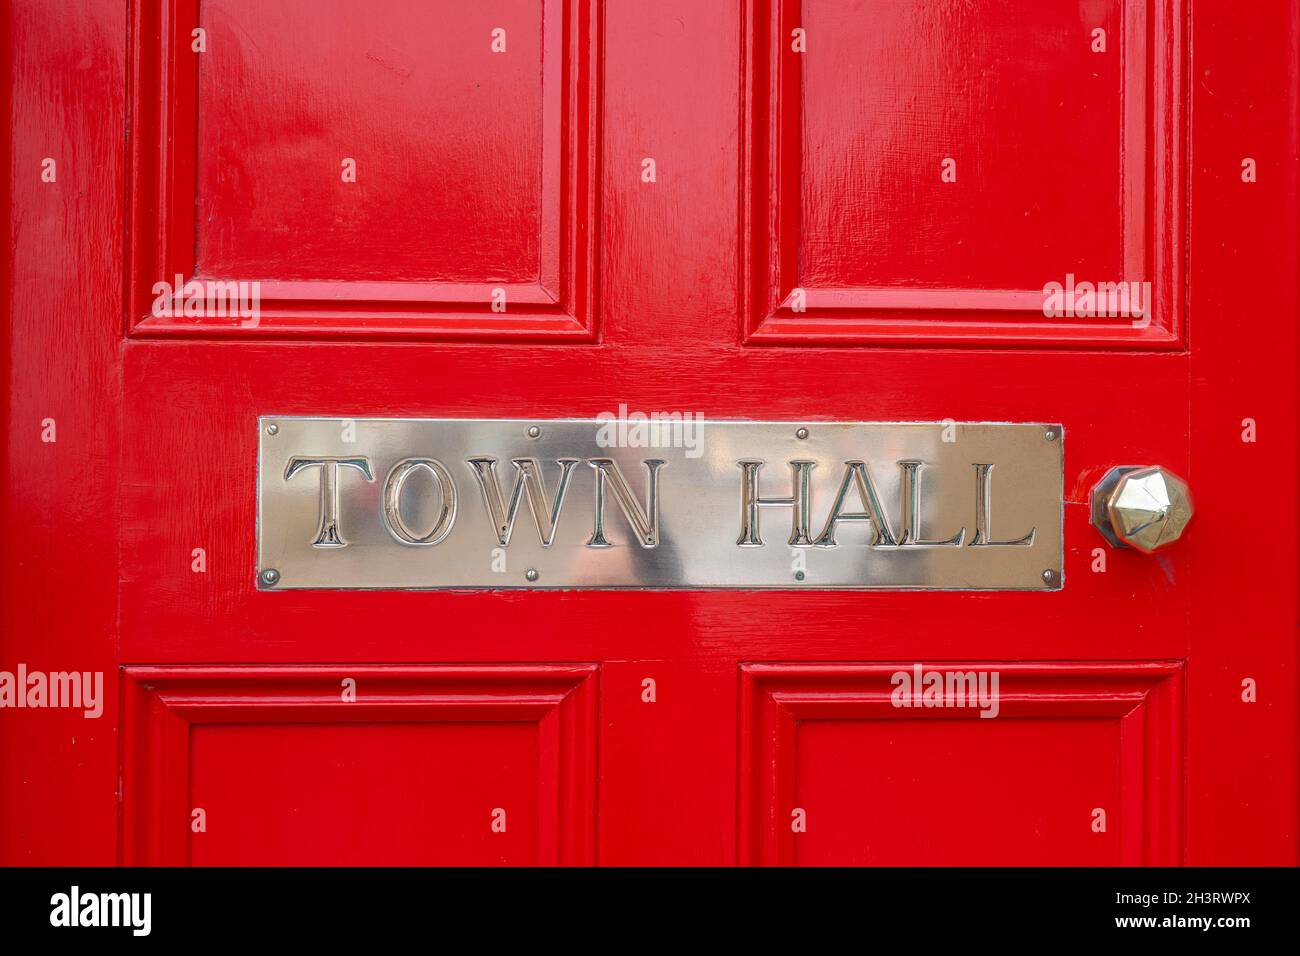 Town Hall silver metal sign. Polished chrome steel sign on bright red wooden door, shiny and clean stainless steel handle. Capital letters town hall Stock Photo